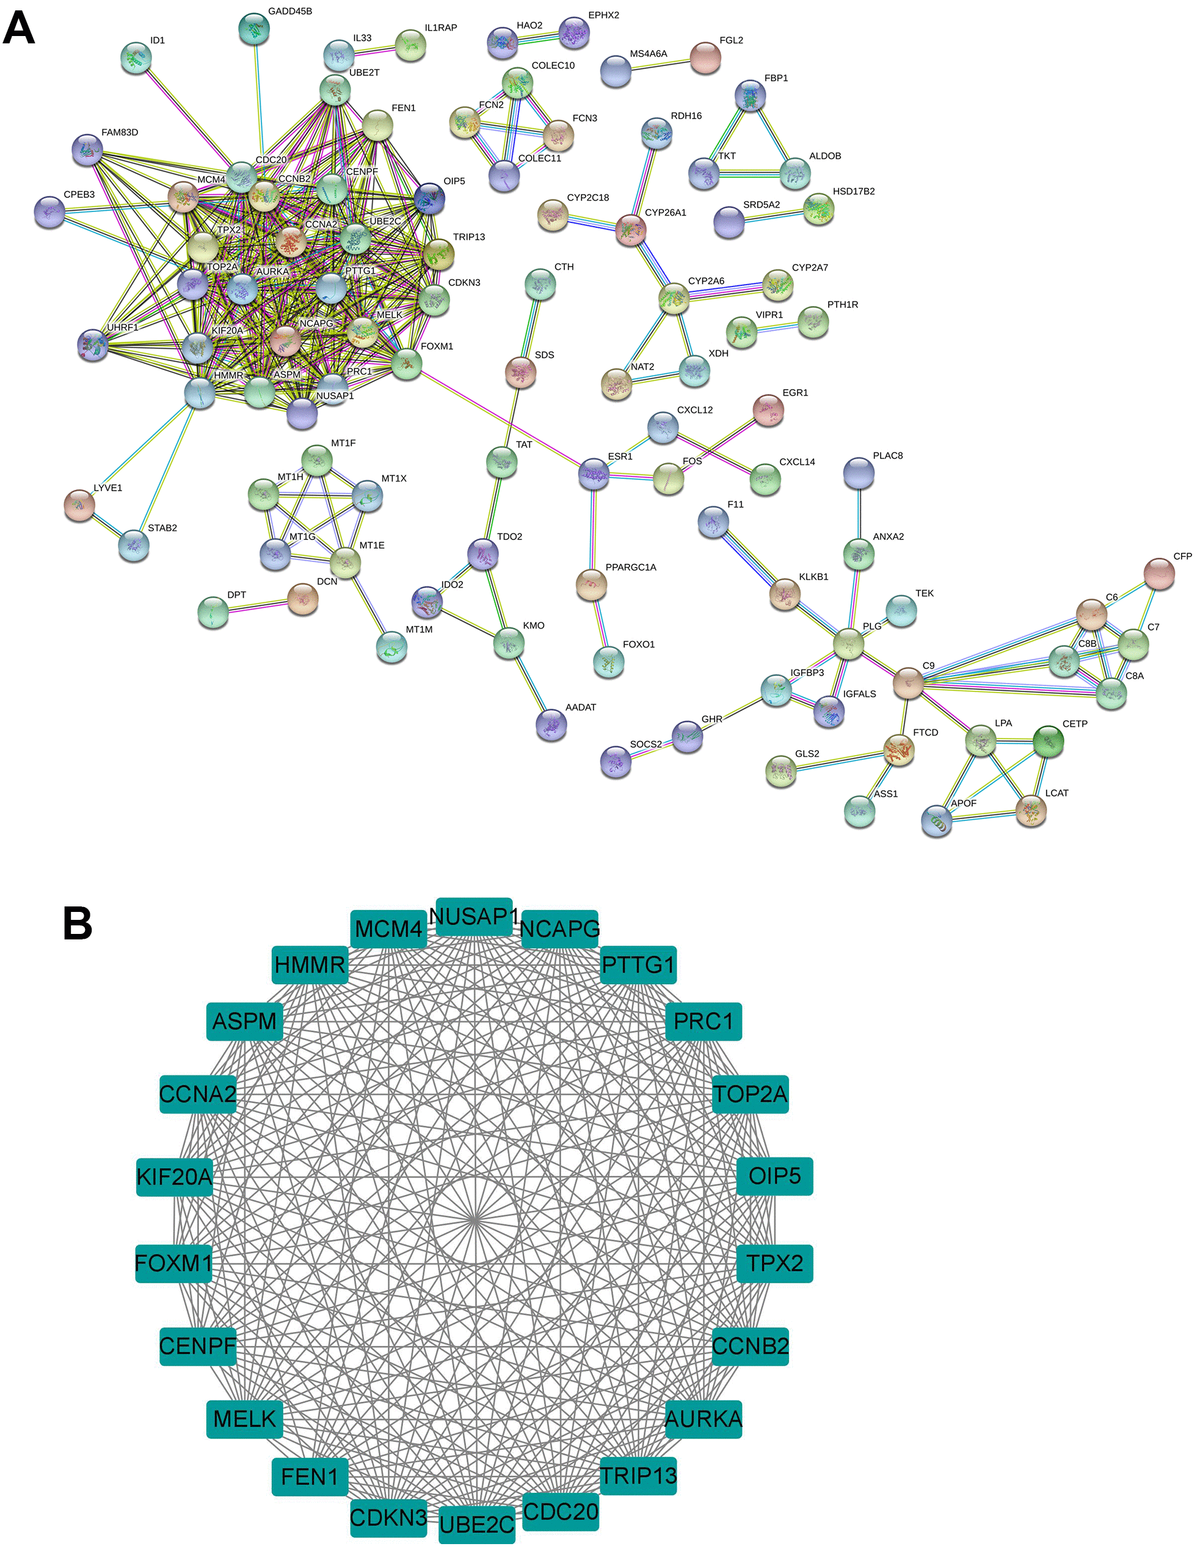 Identification of hub genes from common DEGs. (A) PPI network of the common DEGs was constructed by the STRING database. (B) The sub-module of PPI network as identified by the MCODE tool in Cytoscape.